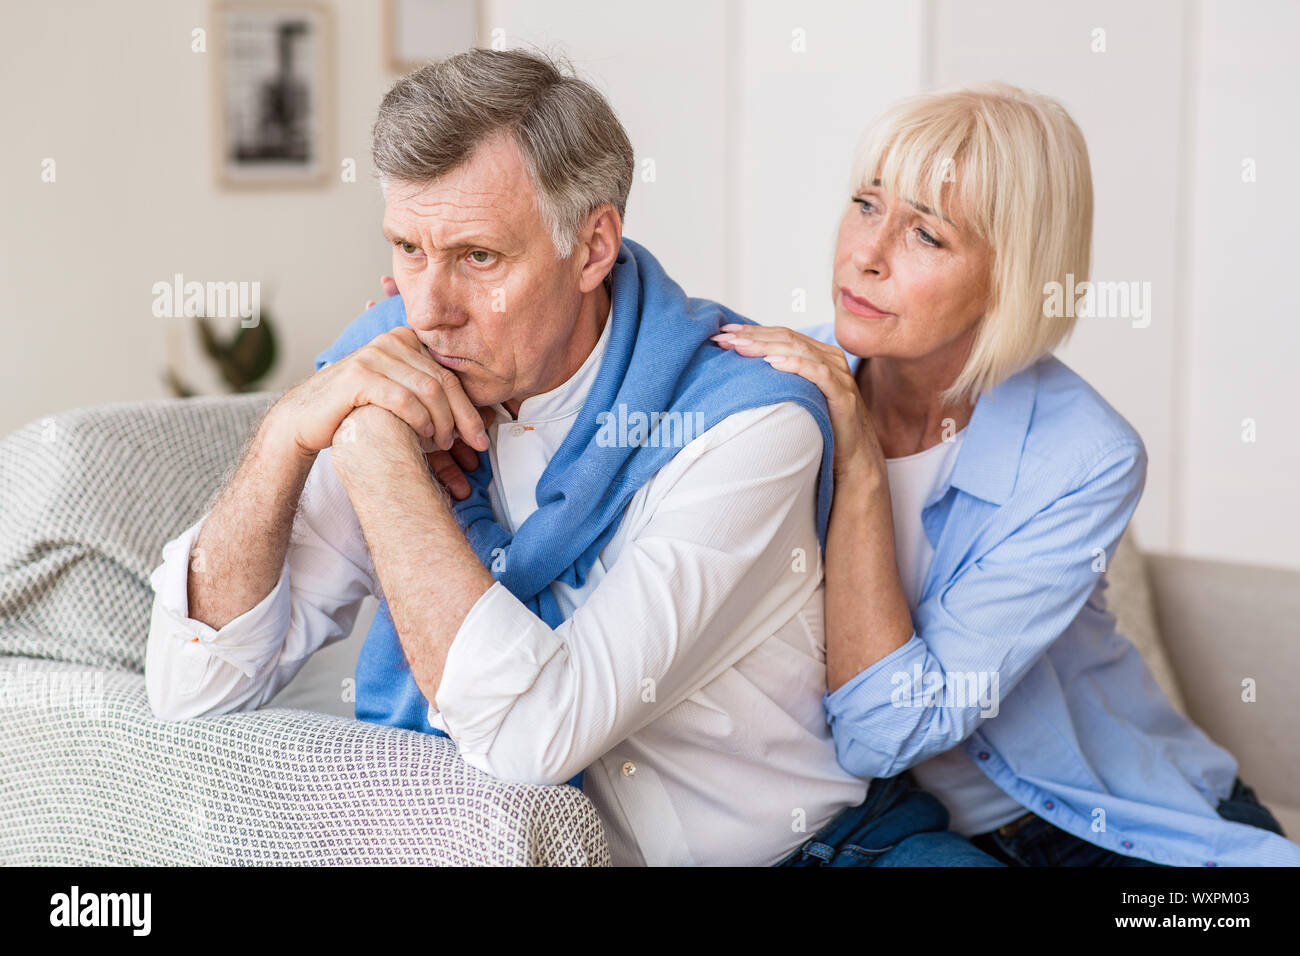 Senior woman consoling husband after arguing at home Stock Photo